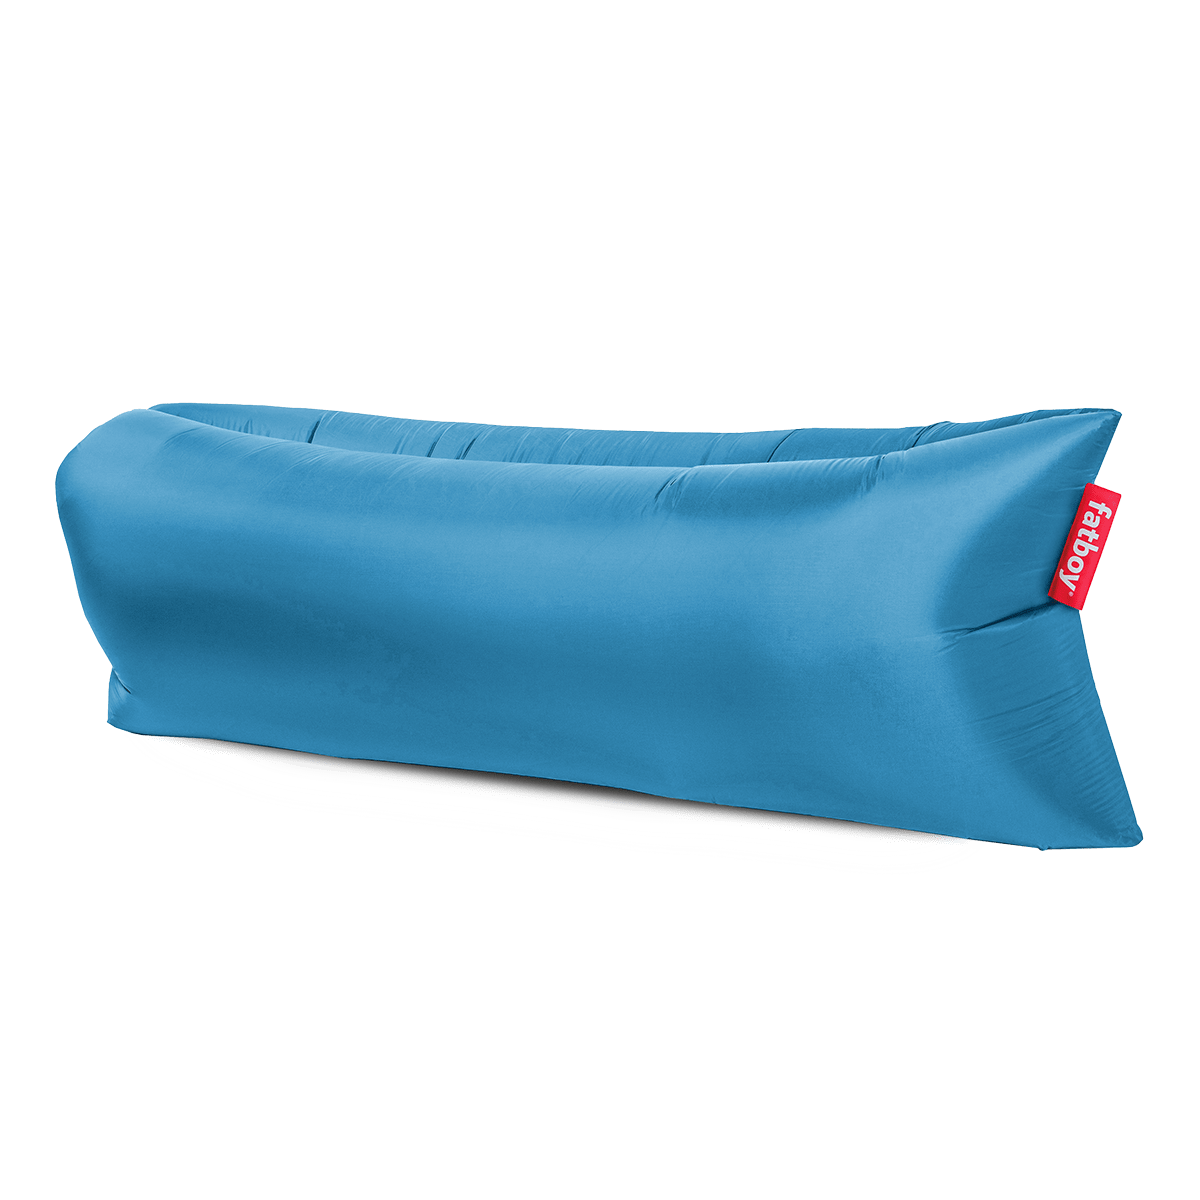 geboren Dierentuin s nachts Het strand Lamzac®: the one and only air sofa for adventures | Fatboy